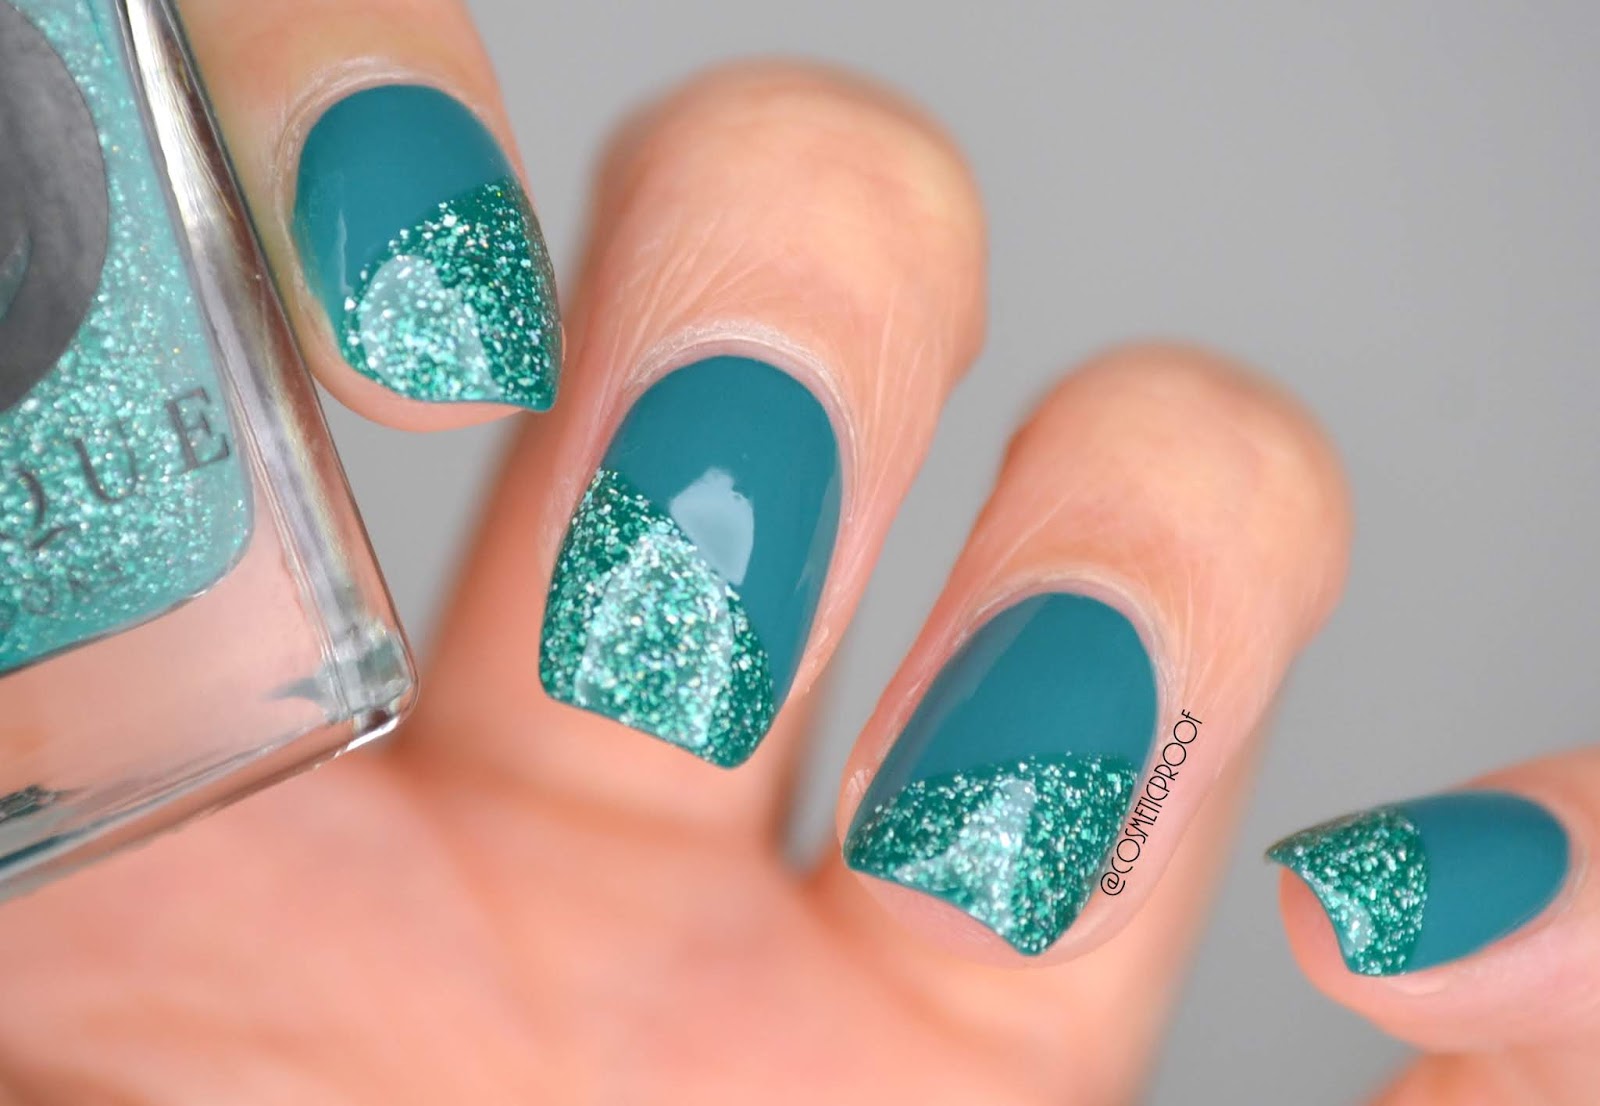 Teal Nail Art Tutorial: 5 Easy Designs for Short Nails - wide 10